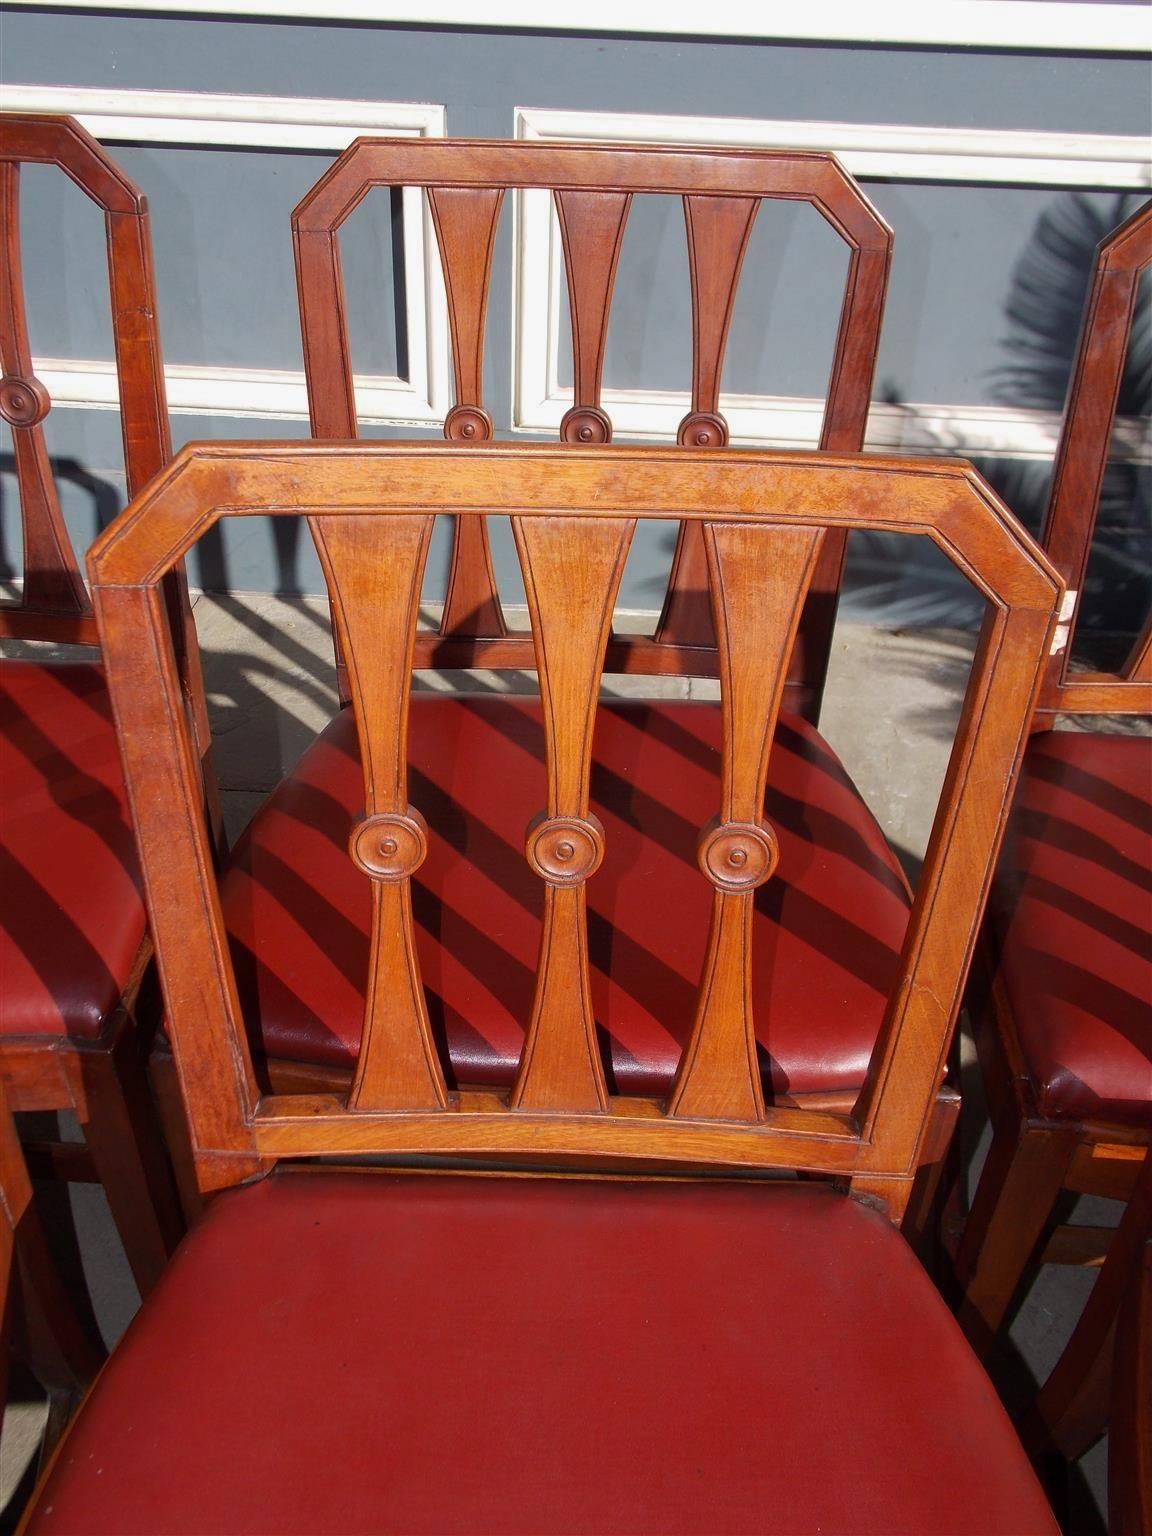 Early 19th Century Set of Ten English Regency Mahogany Dining Chairs With Leather Seats, Circa 1800 For Sale